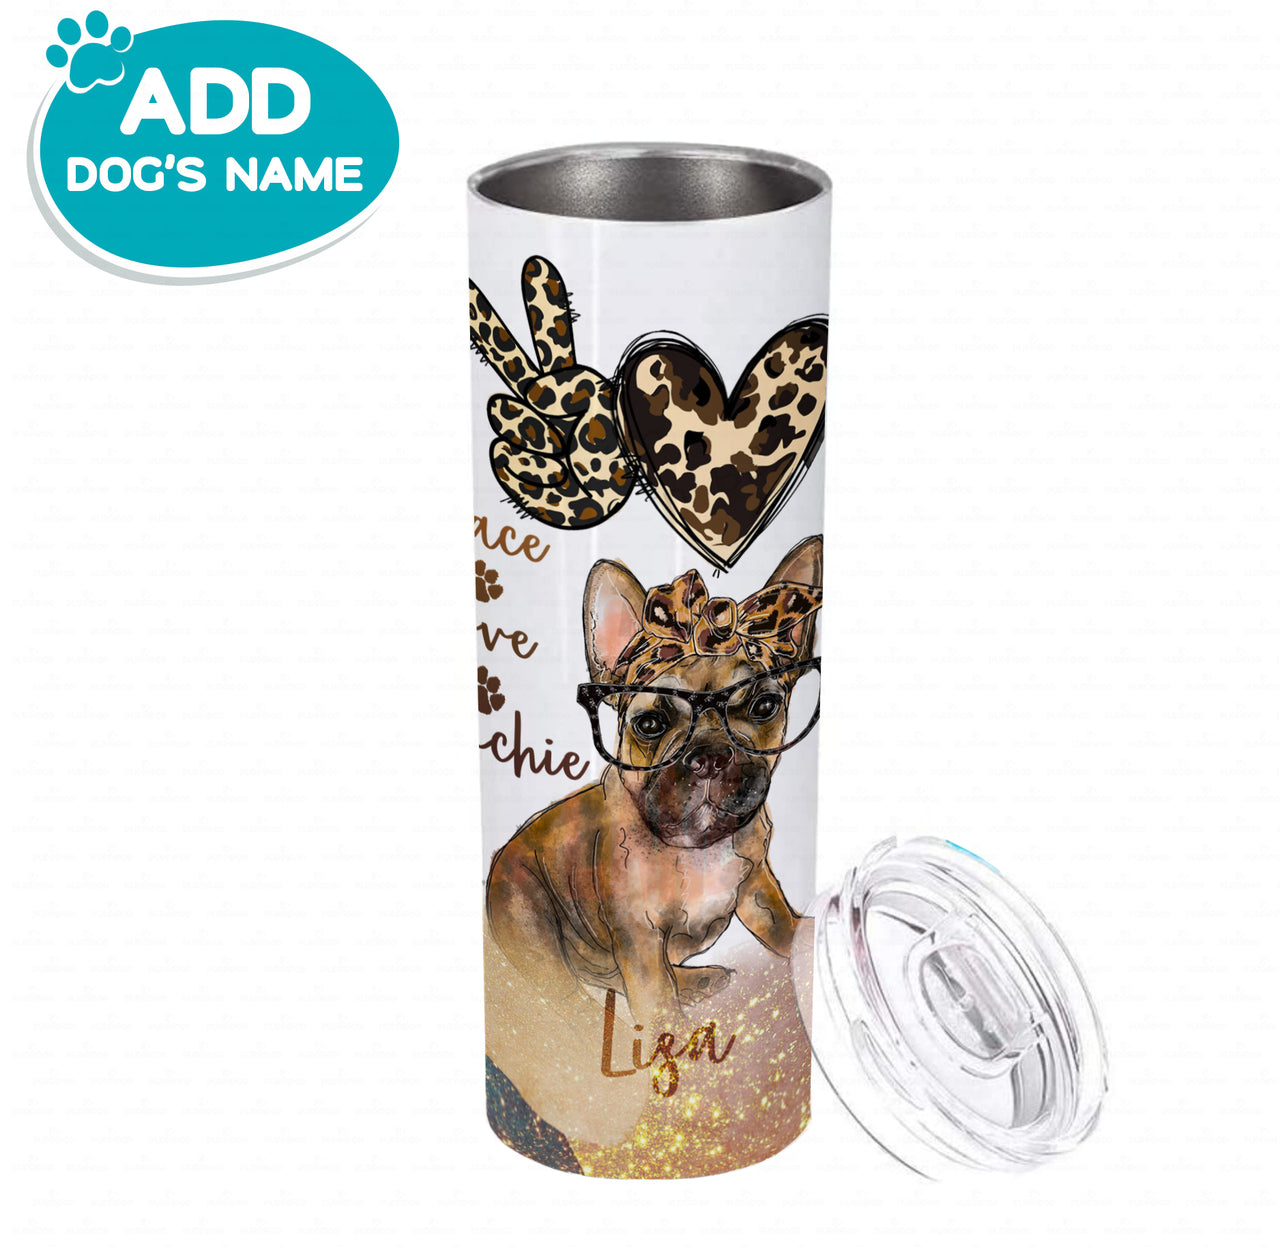 Personalized Dog Gift - Peace Love Frenchie For Dog Mom - Tumbler